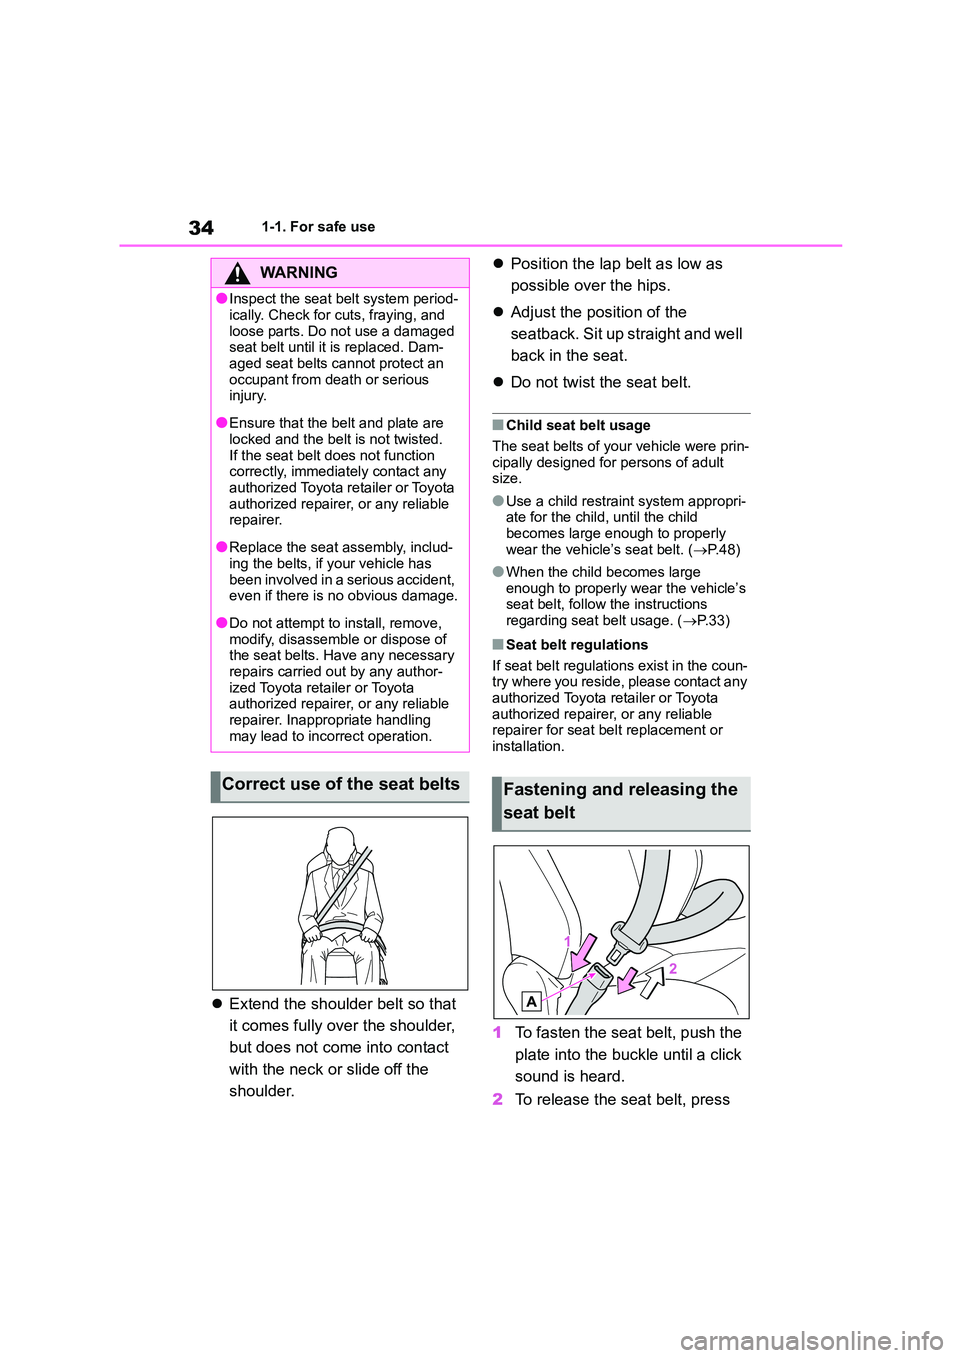 TOYOTA COROLLA HATCHBACK 2022  Owners Manual (in English) 341-1. For safe use
Extend the shoulder belt so that  
it comes fully over the shoulder, 
but does not come into contact 
with the neck or slide off the 
shoulder. 
 Position the lap belt as low